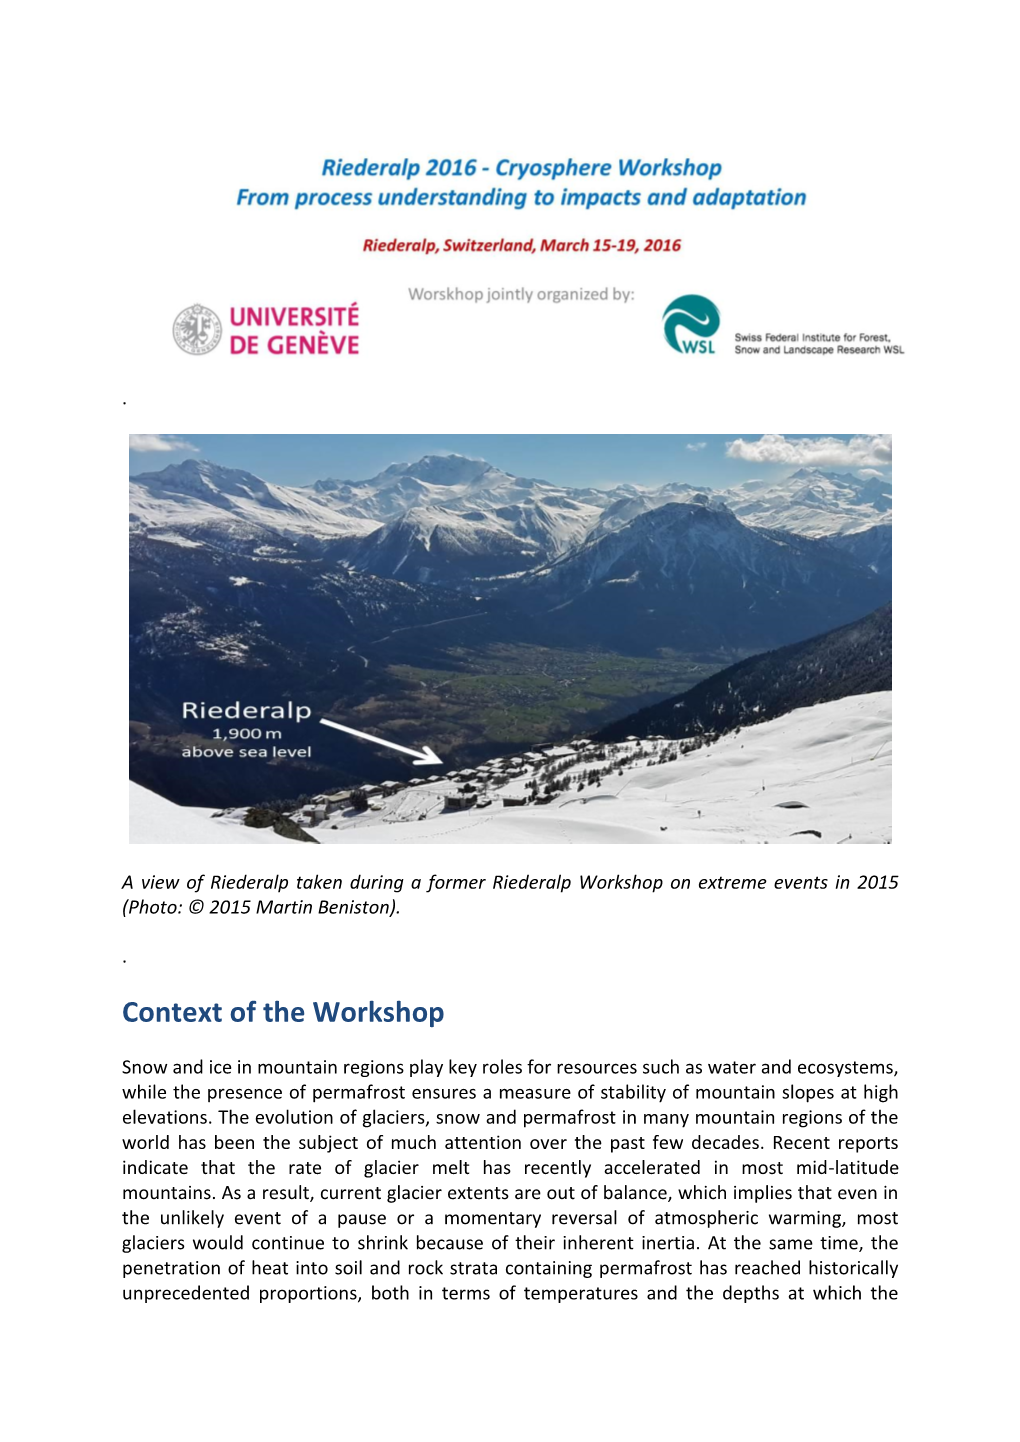 Context of the Workshop